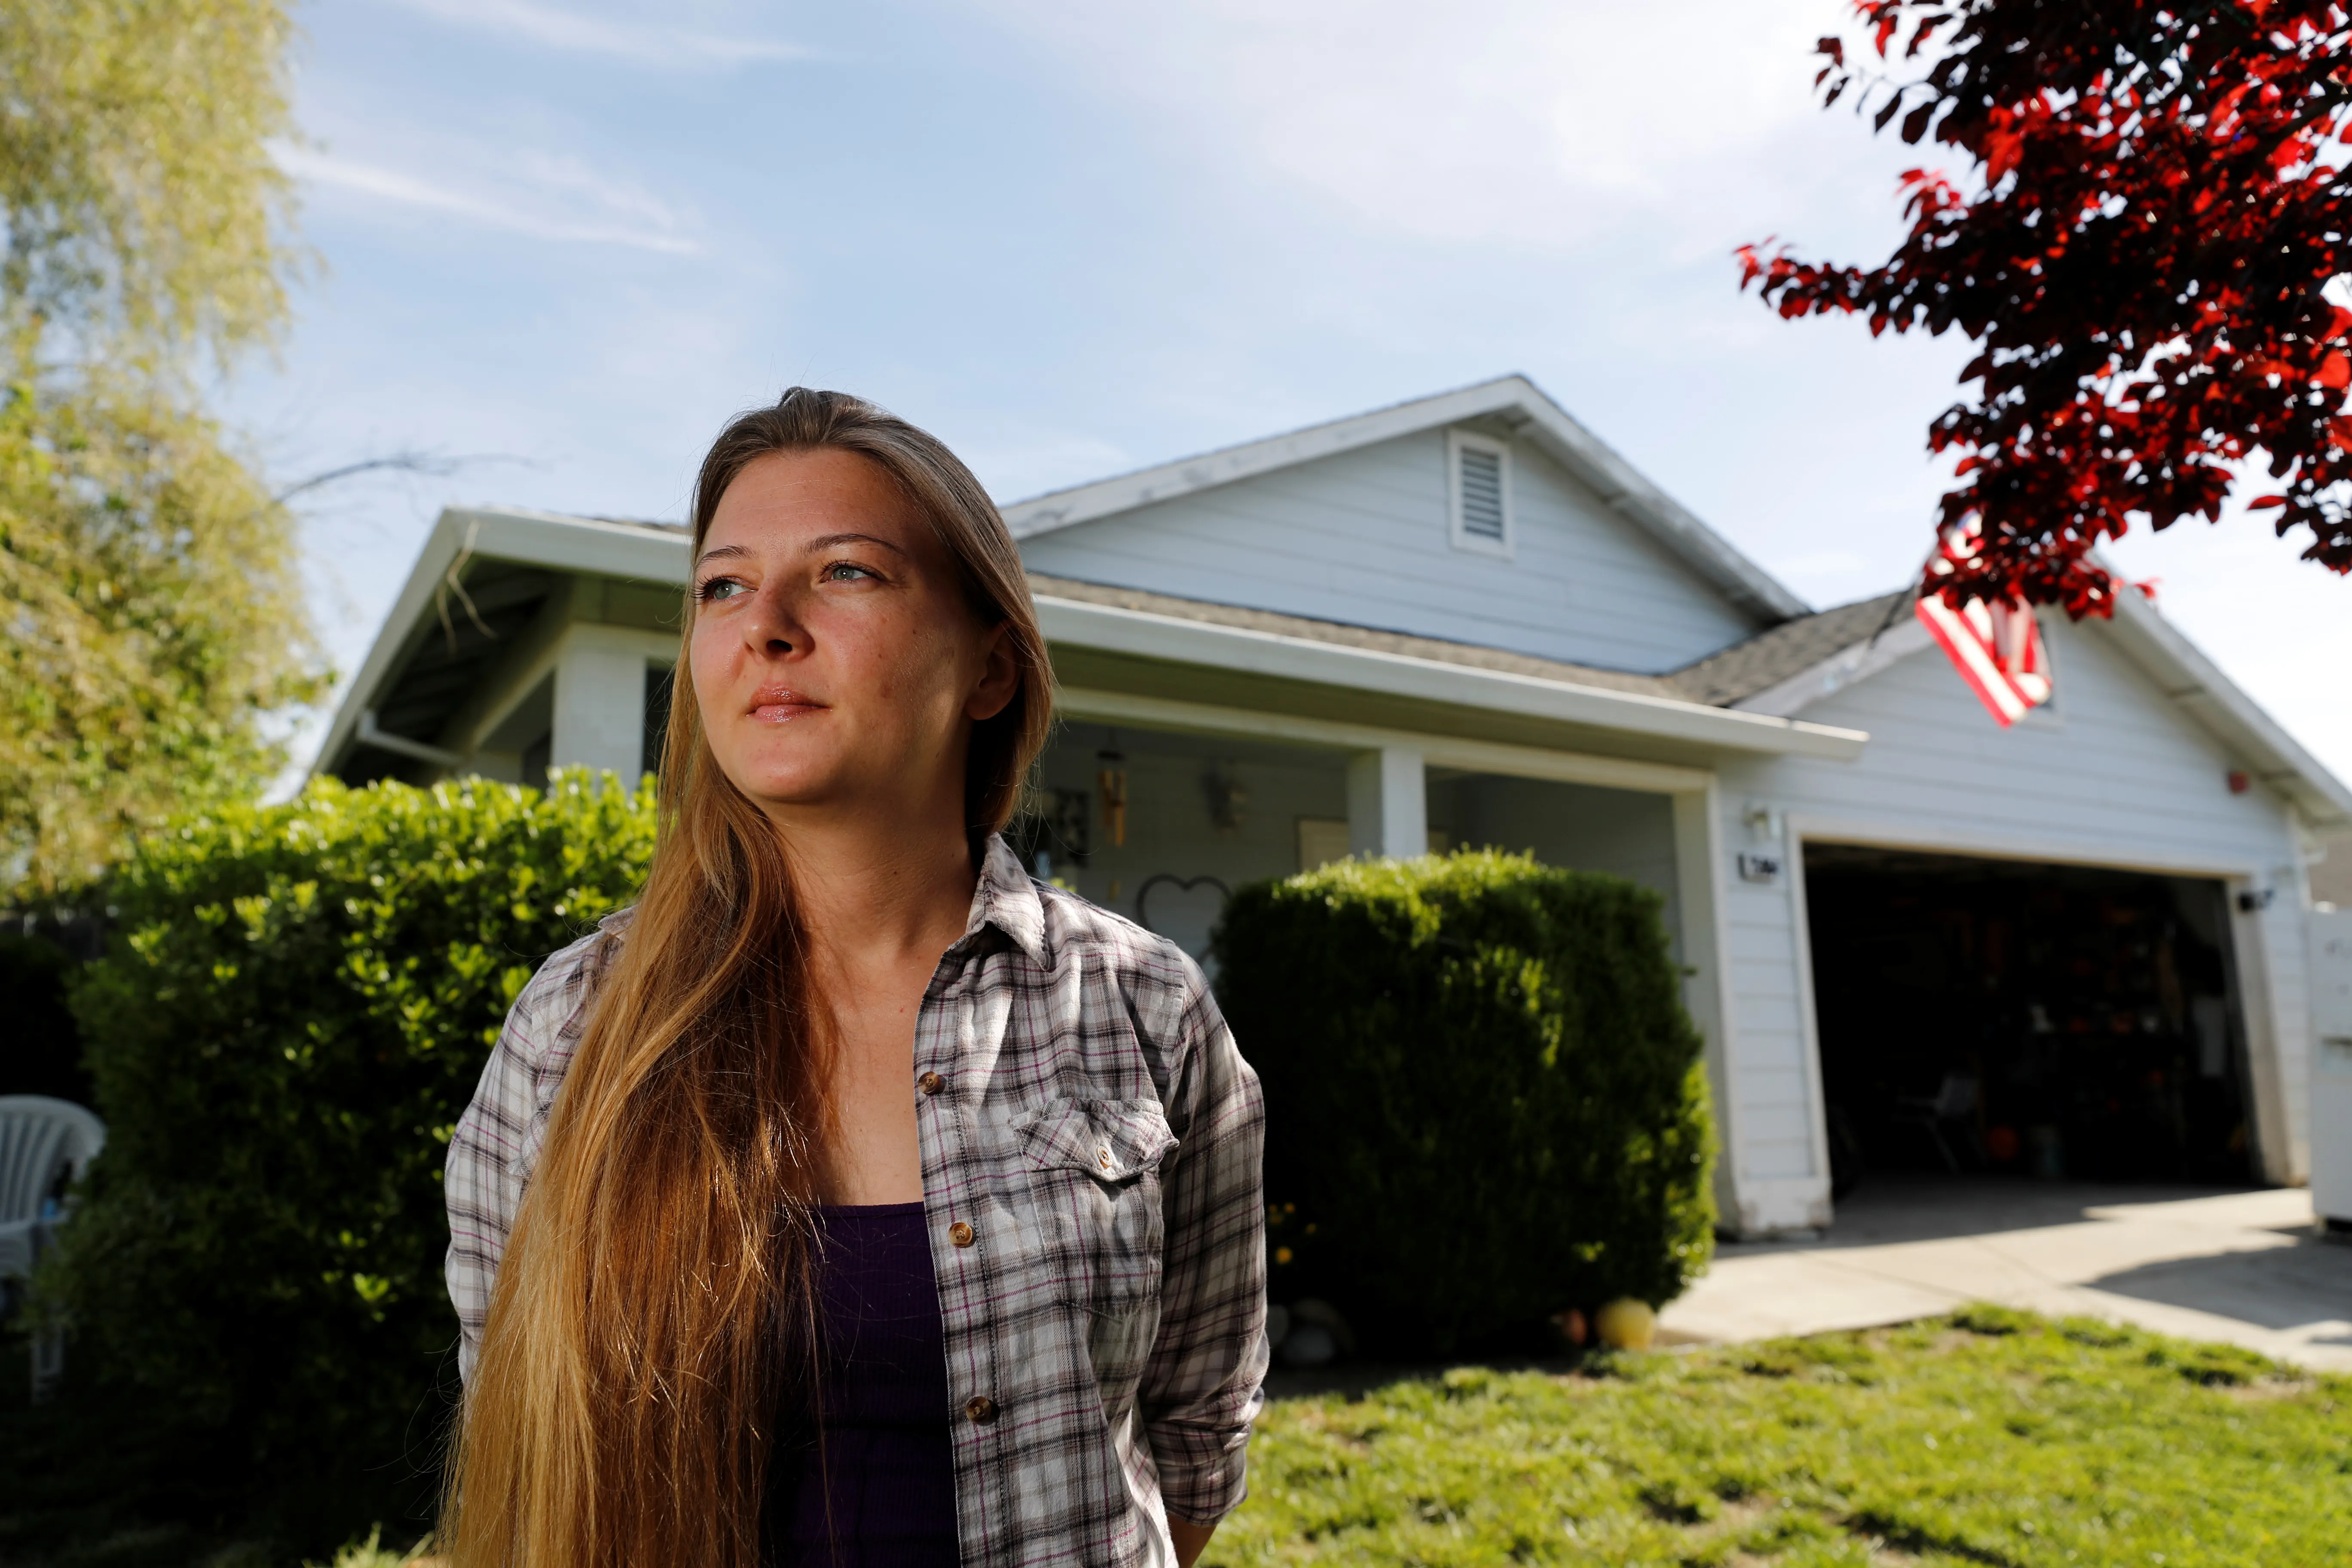 Whitney Hurst stands in front of the house that she rents from Invitation Homes in Esparto, California, U.S. April 24, 2018. Picture taken April 24, 2018.  To match Special Report USA-HOUSING/INVITATION.  REUTERS/Fred Greaves - RC17AE180000